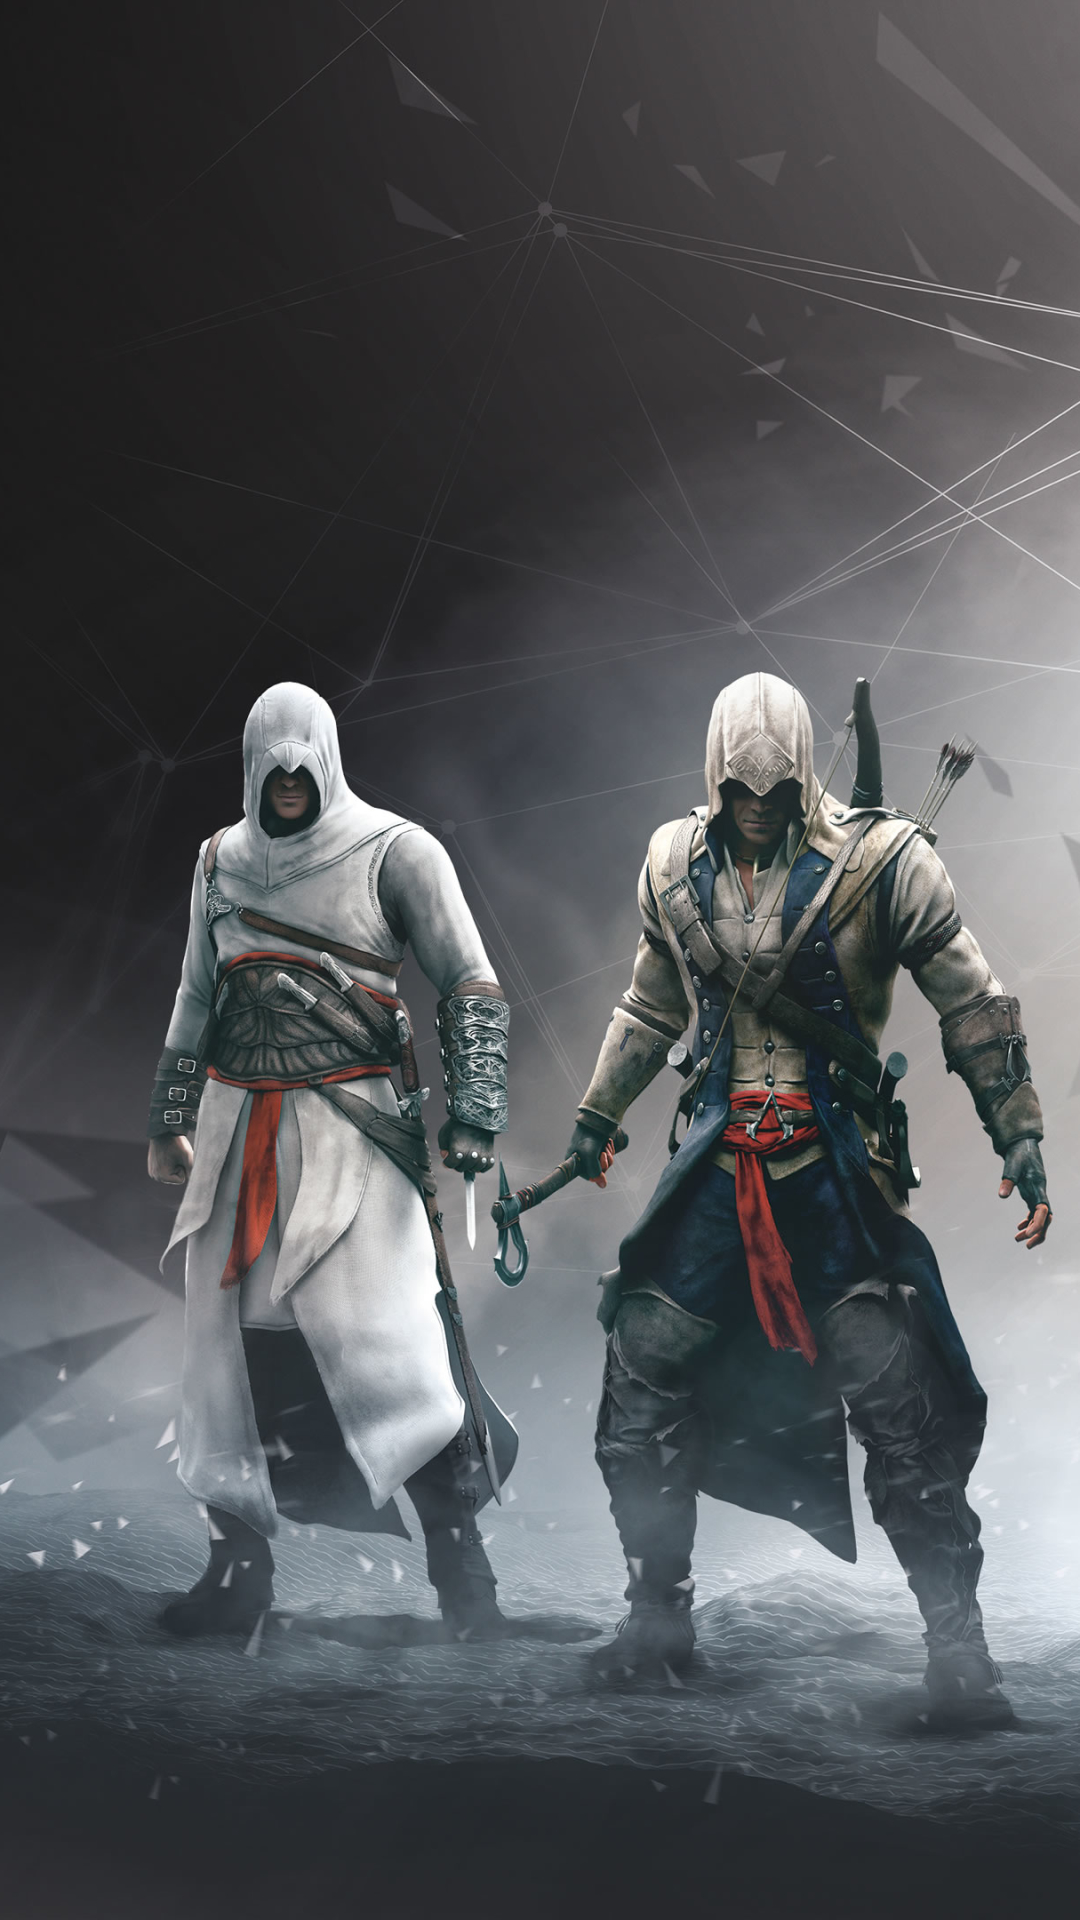 edward kenway, connor (assassin's creed), video game, assassin's creed, ezio (assassin's creed), altair (assassin's creed), jacob frye